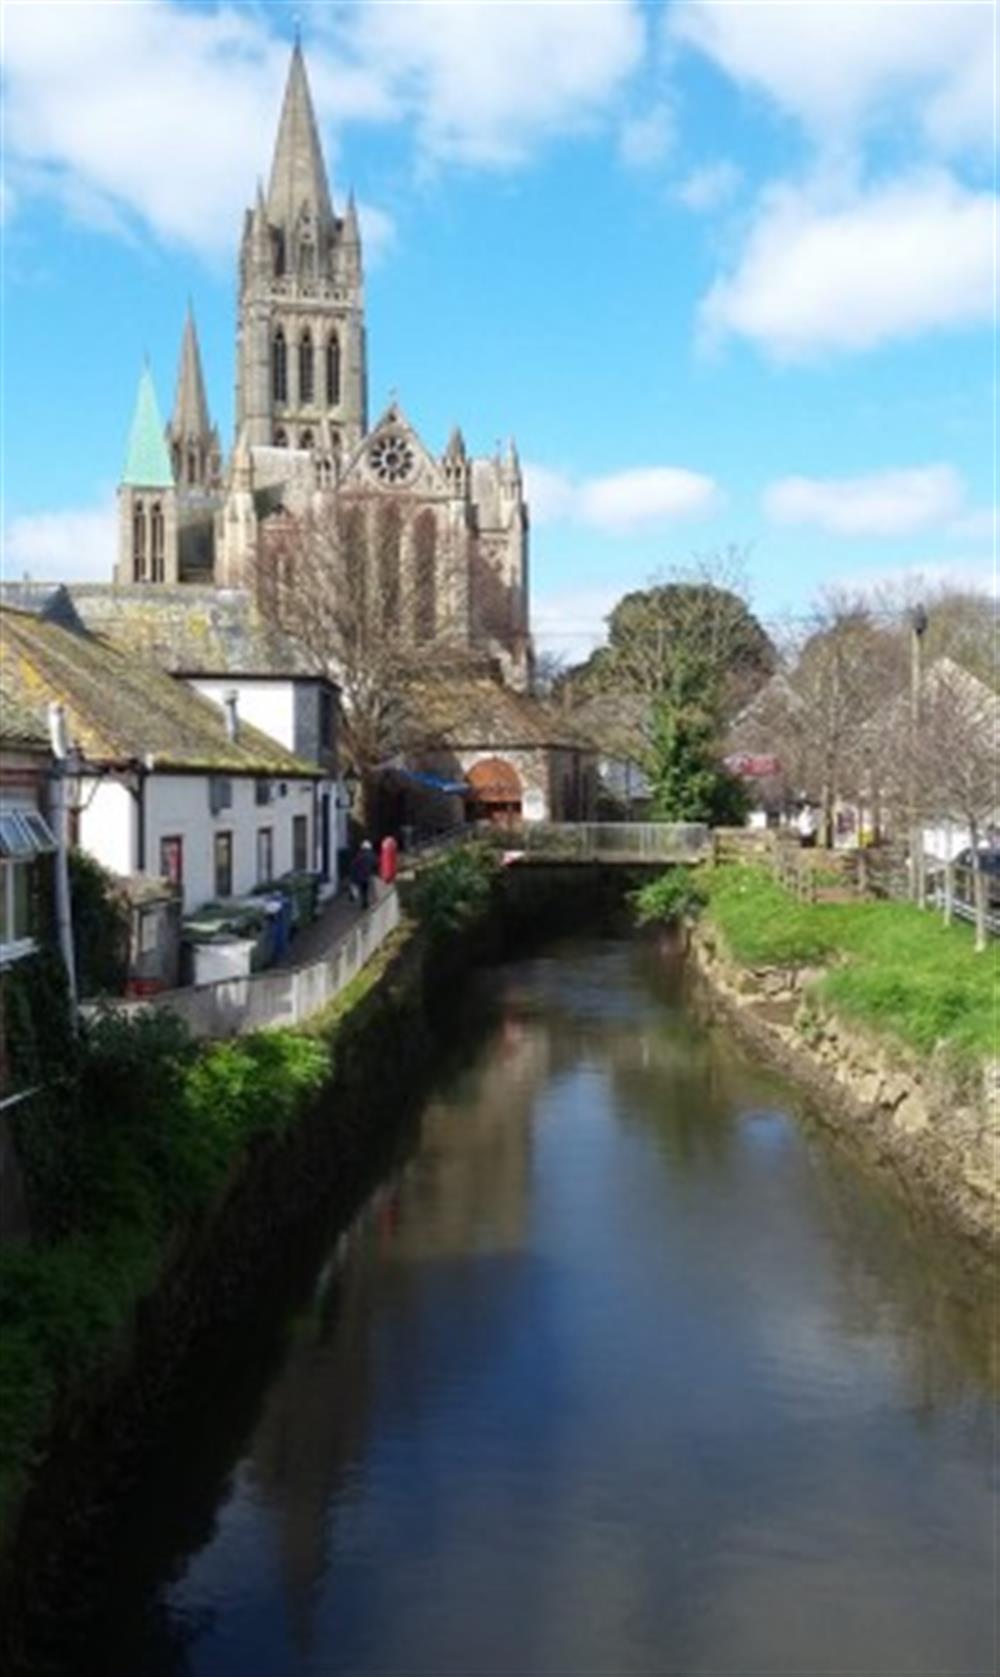 Truro is our main shopping centre - great for shops, cafes and the cinema.